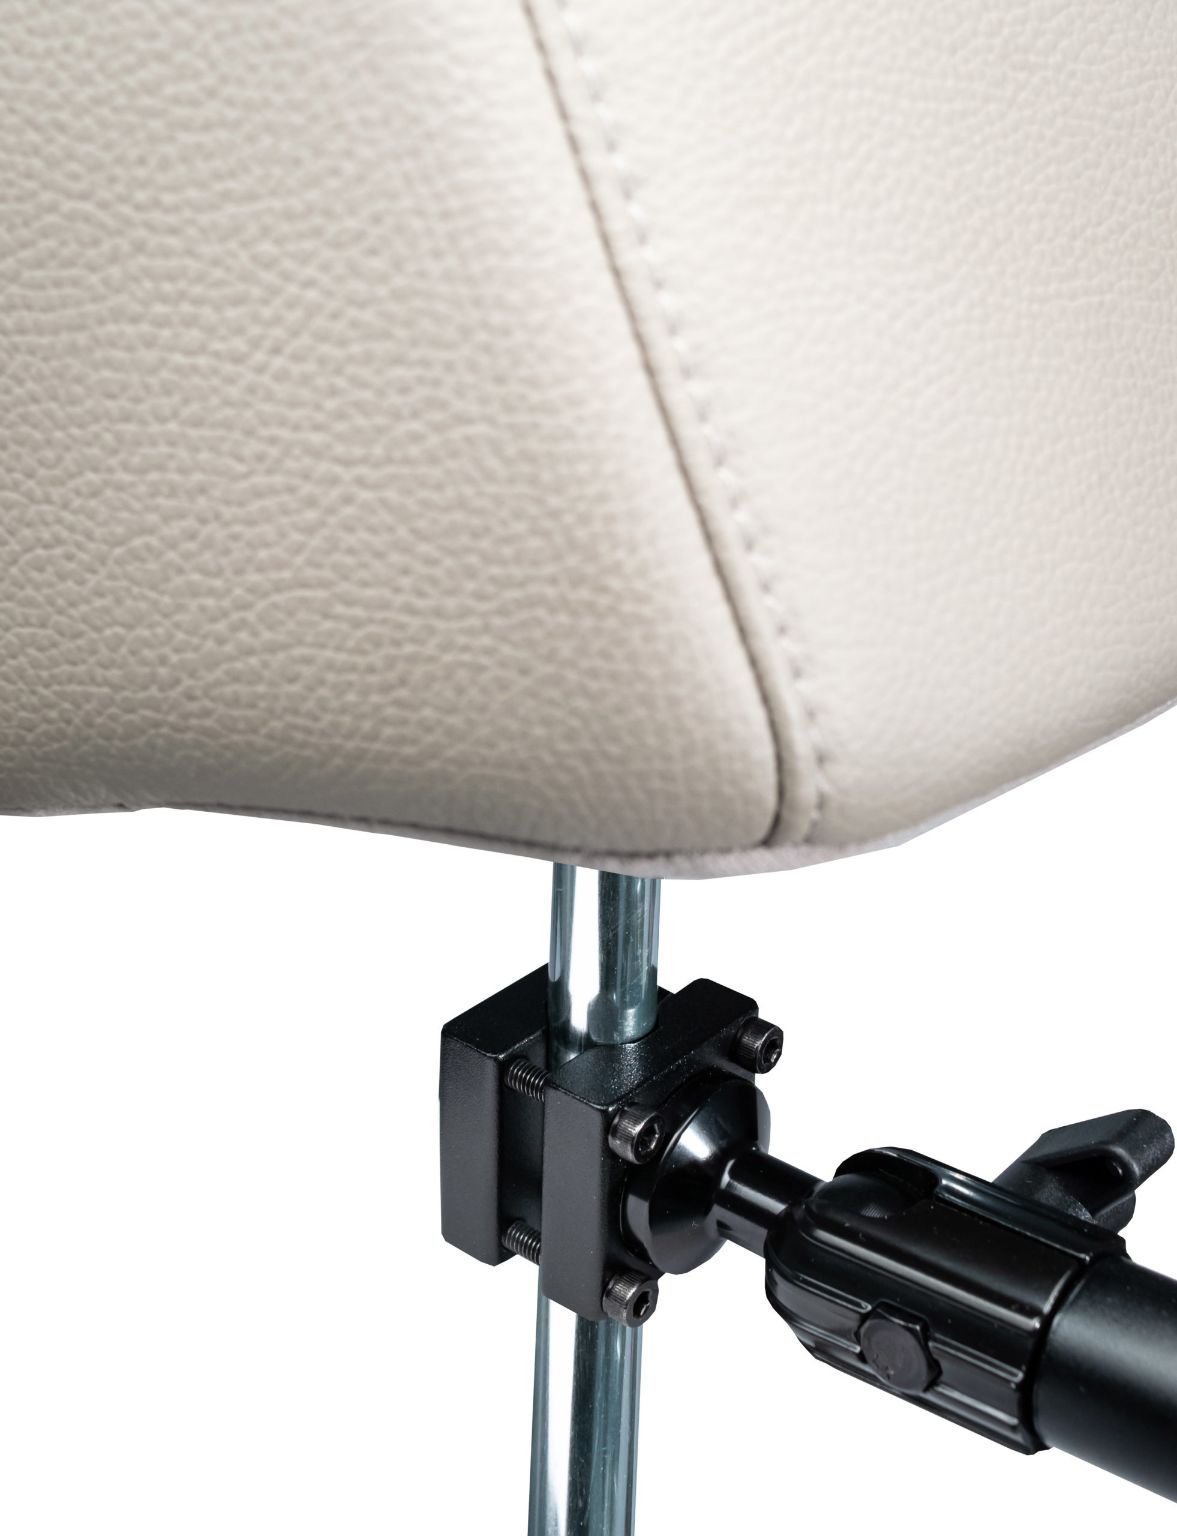 Vehicle Headrest Flex Mount for 7-14 Inch Tablets including iPad Air & iPad Pro 11" - M2/M4 (2024), iPad Air and iPad Pro 13" - M2/M4 (2024) and more